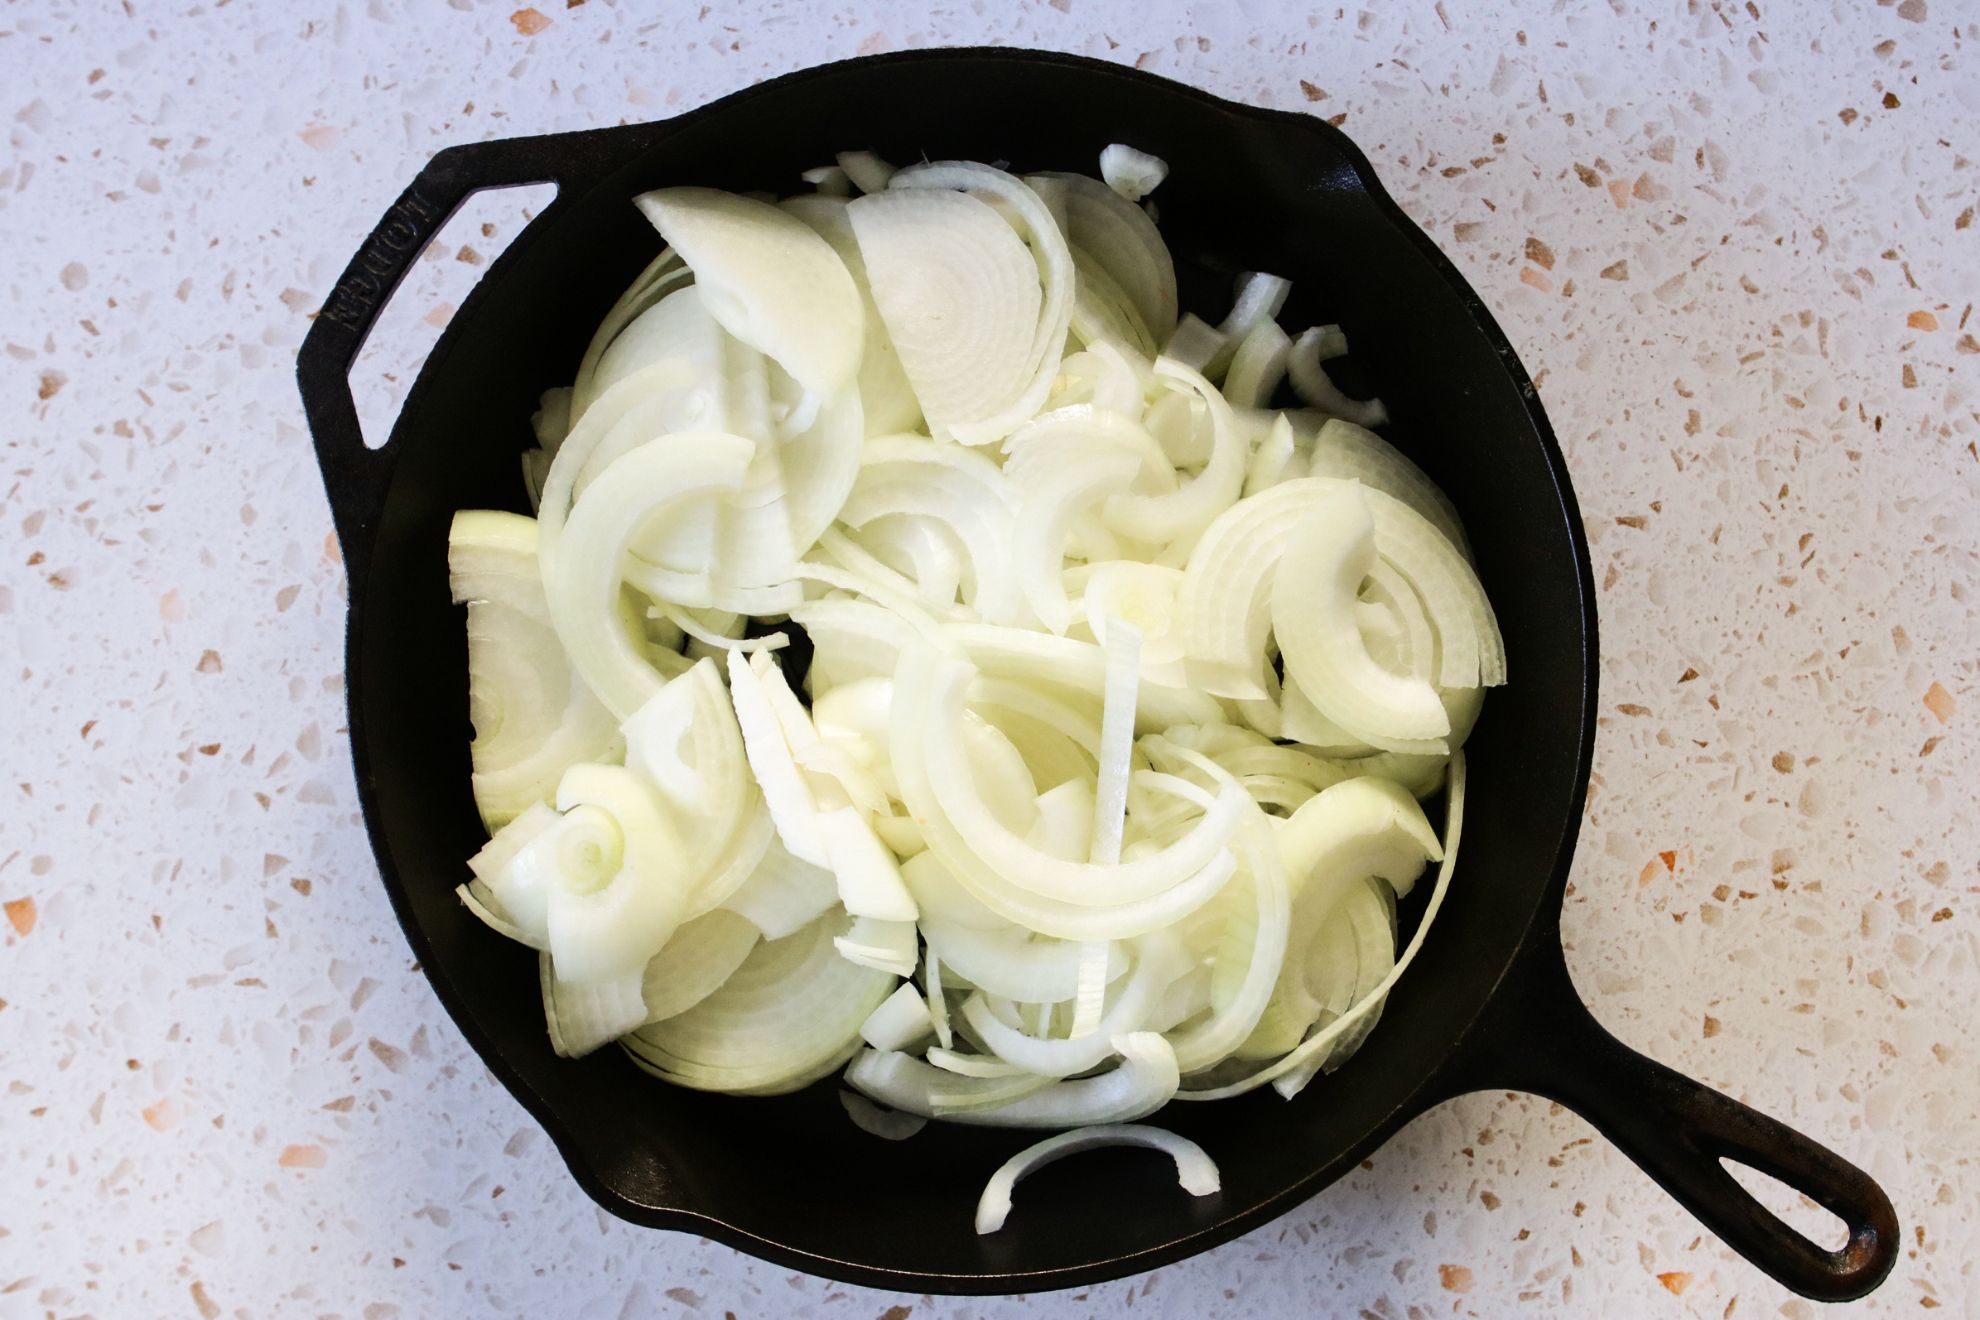 This is an overhead horizontal image of a cast iron skillet with raw sliced onions. The skillet sits on a whiter terrazzo surface.